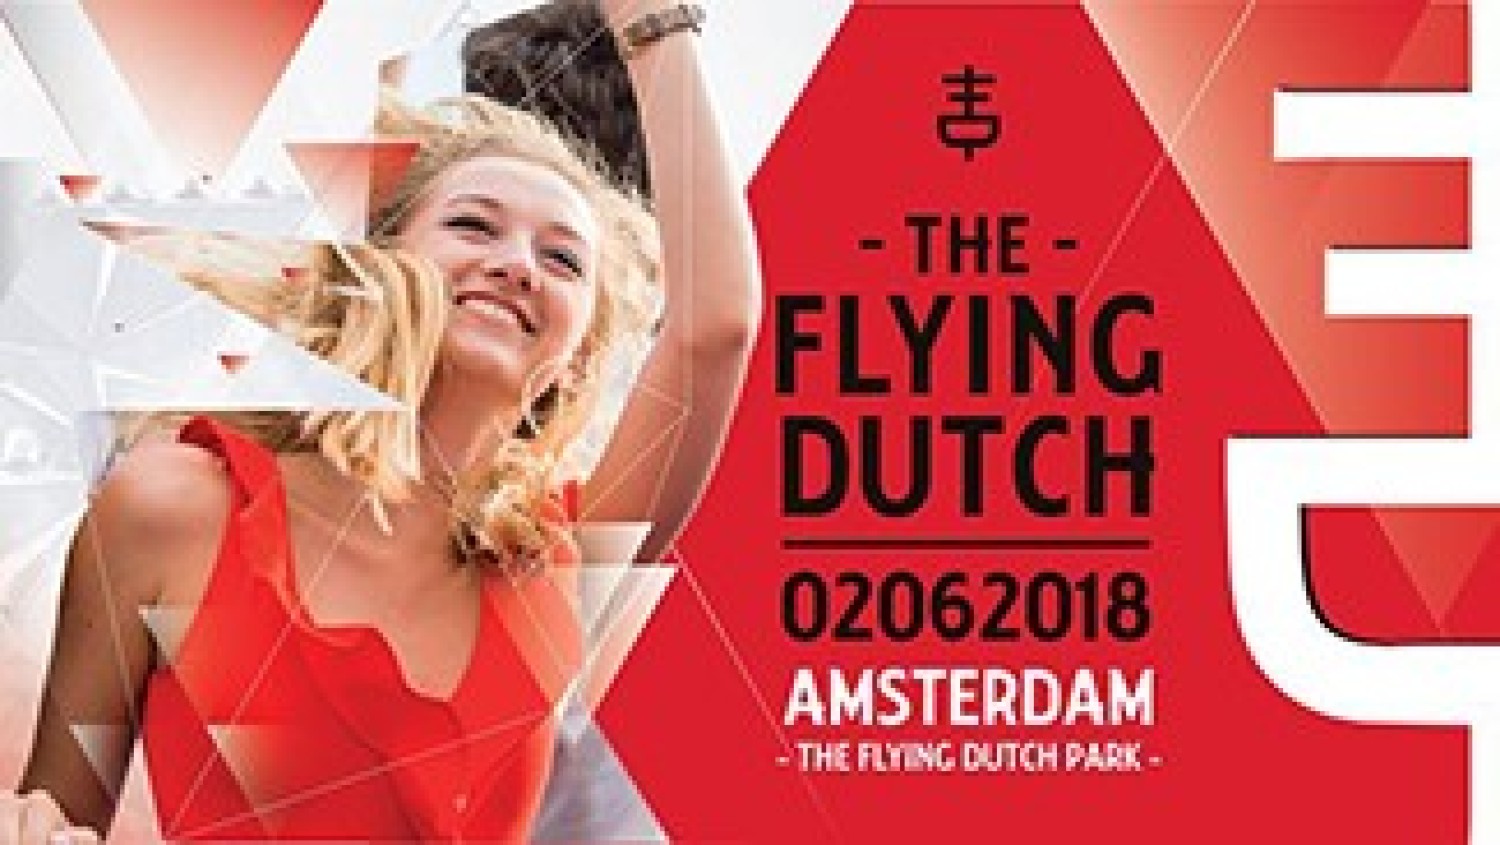 Party report: The Flying Dutch 2018, Amsterdam (02-06-2018)